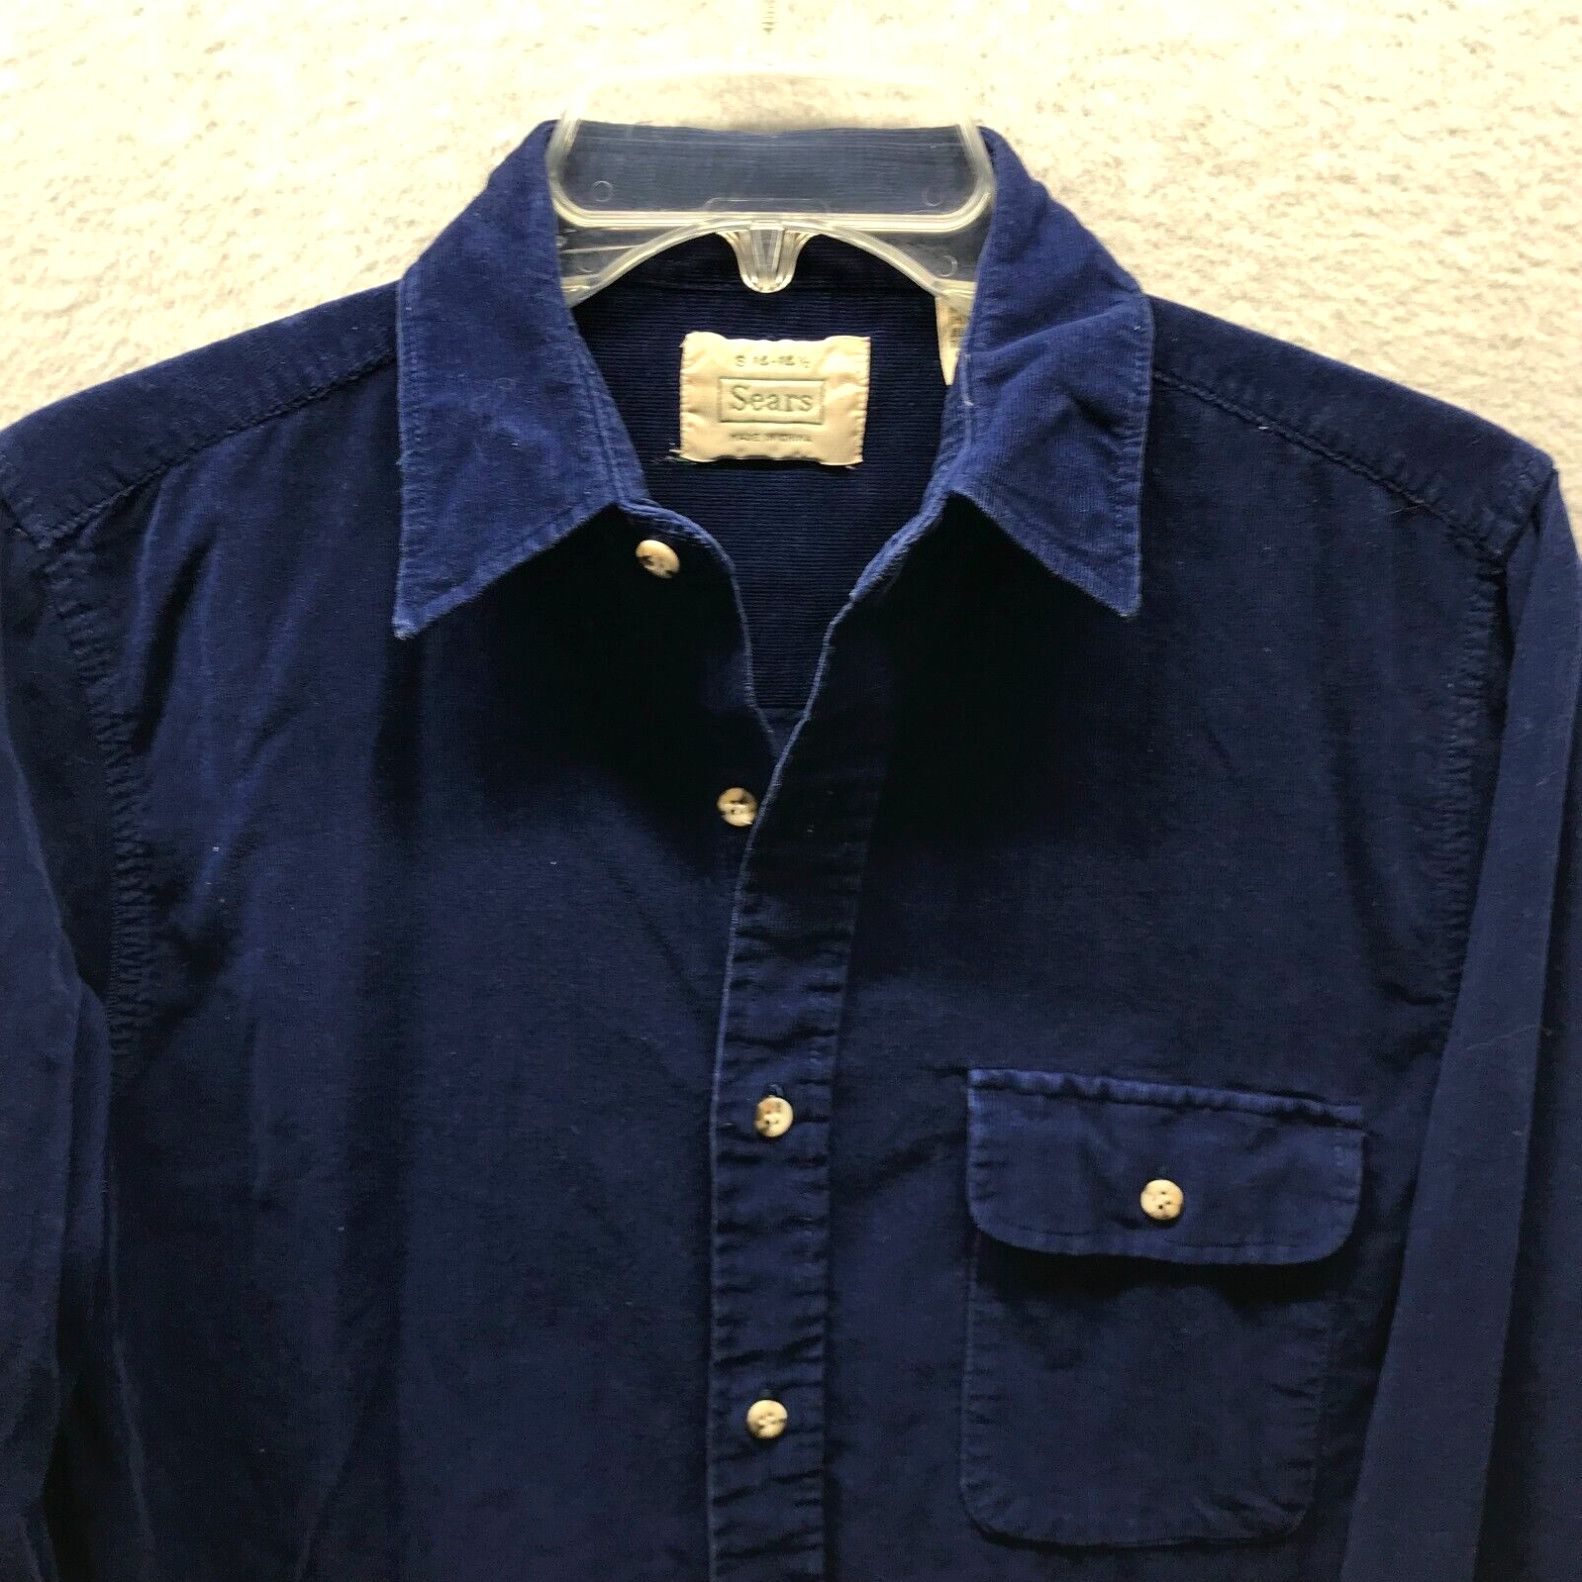 Sears Vintage Sears Shirt Adult Small Blue Corduroy Cotton Outdoor 80s Mens Size US S / EU 44-46 / 1 - 2 Preview